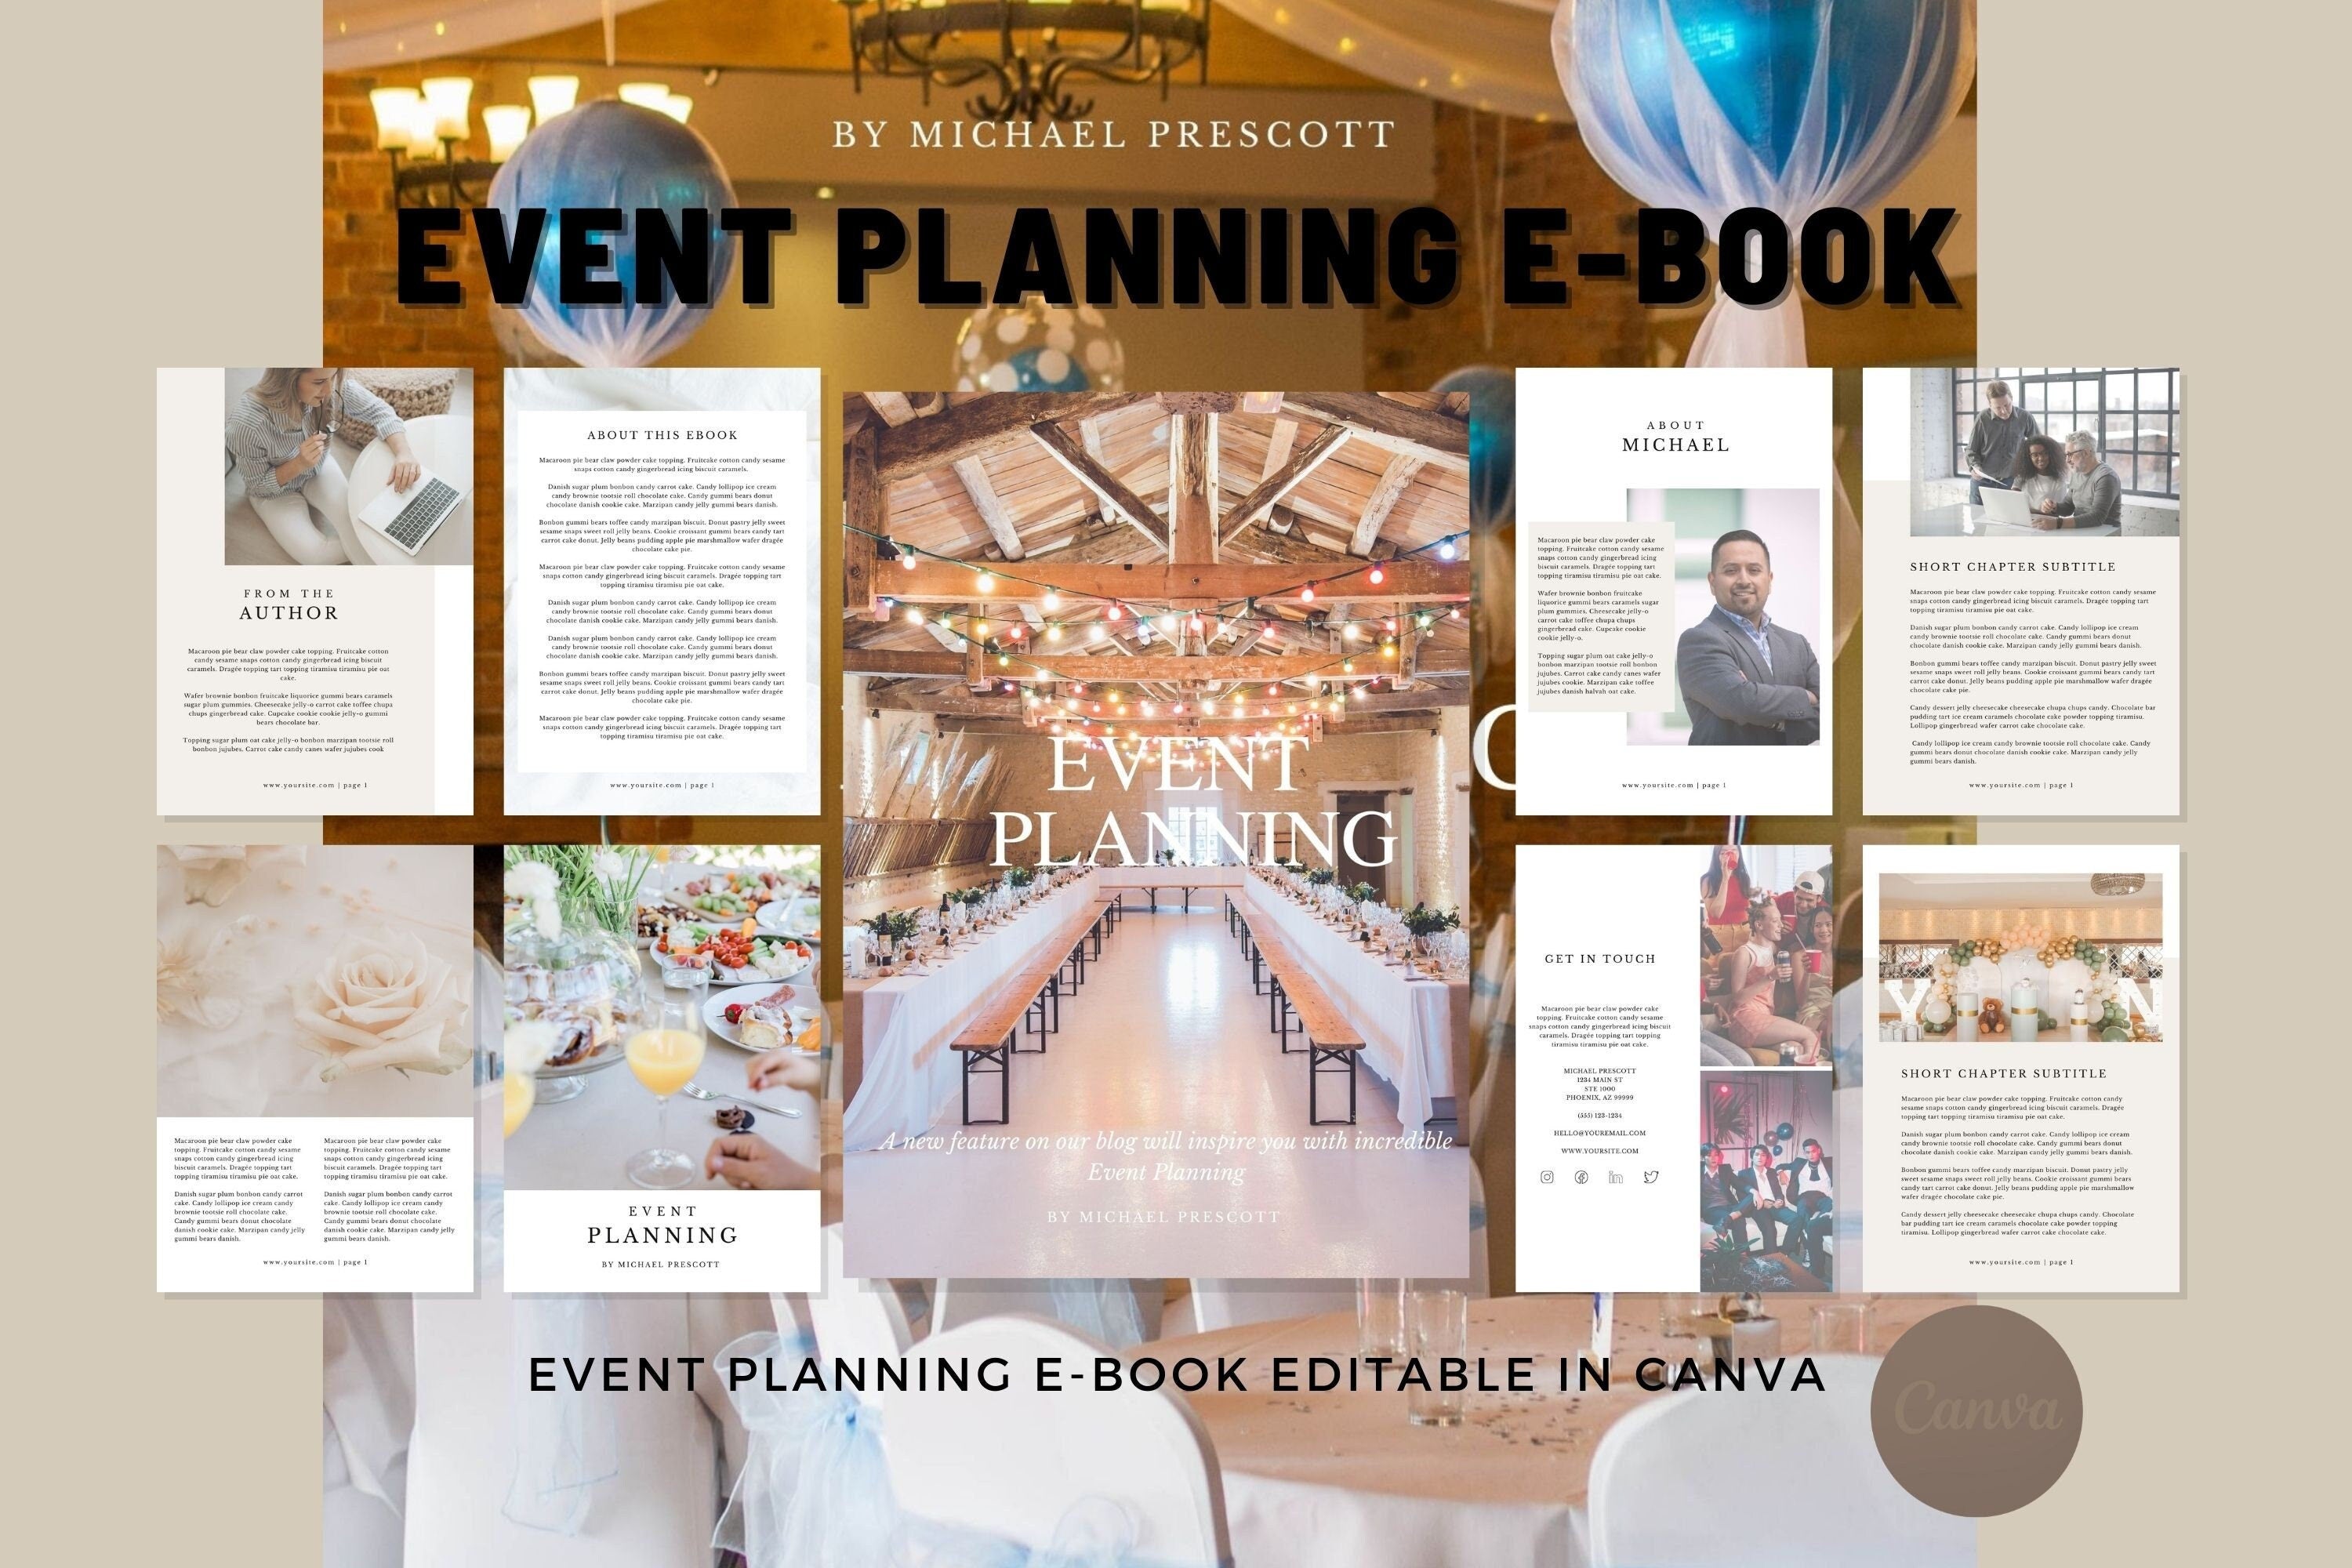 EVENT Planning E-book 40pgs Editable Template, Event Planning Business, Social Media Marketing, Business E-Book Gain Knowledge to Drive Sale